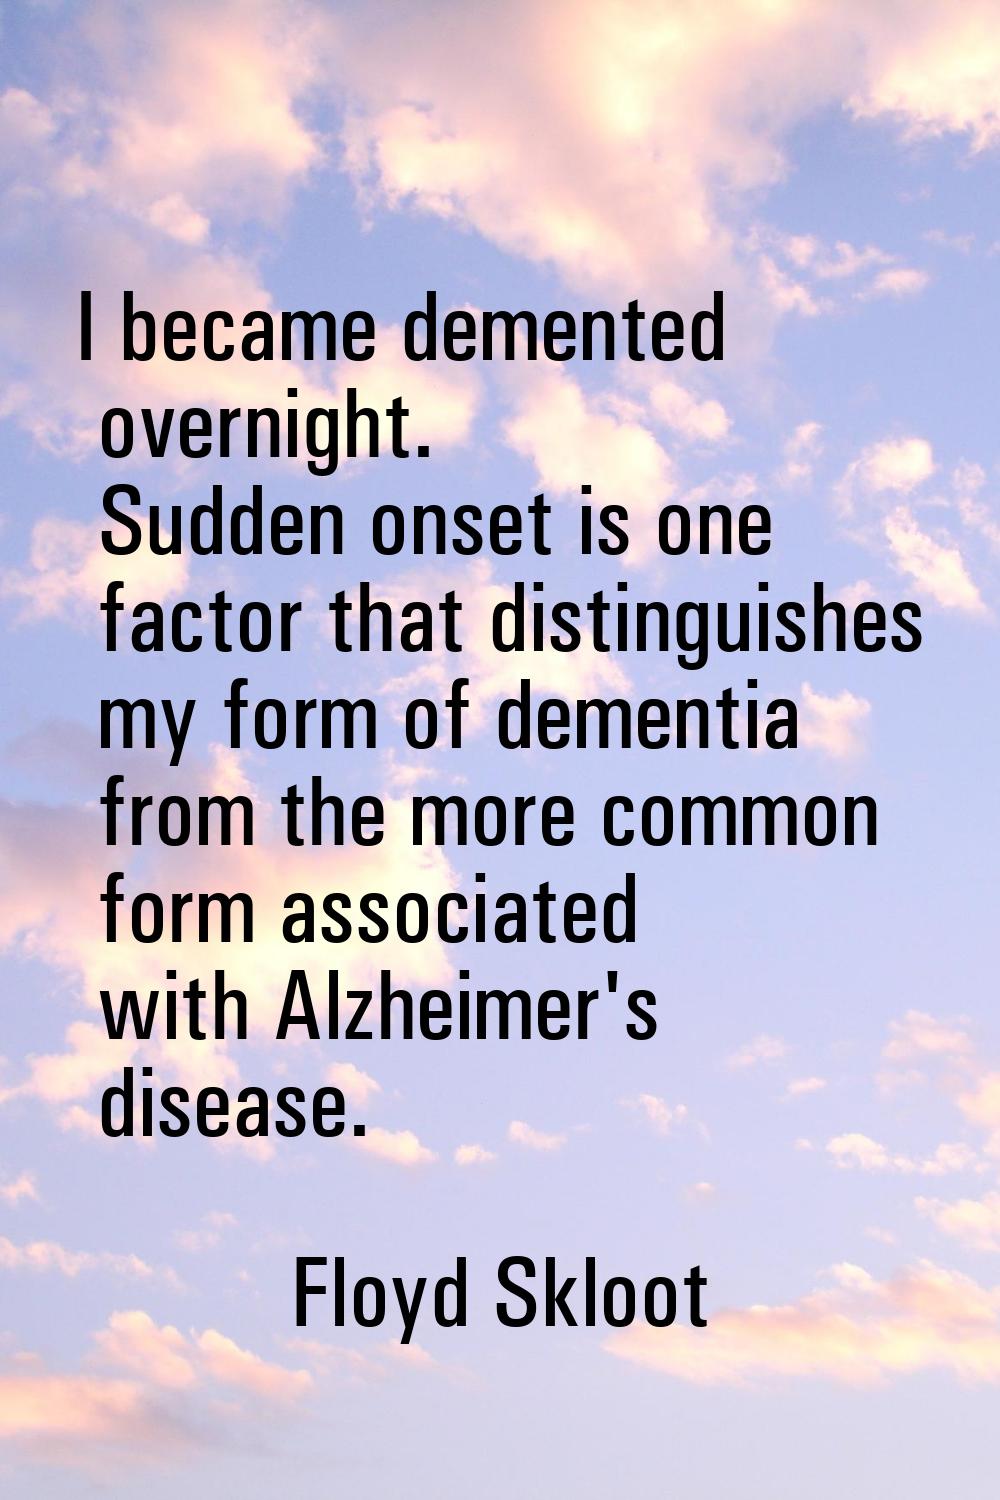 I became demented overnight. Sudden onset is one factor that distinguishes my form of dementia from